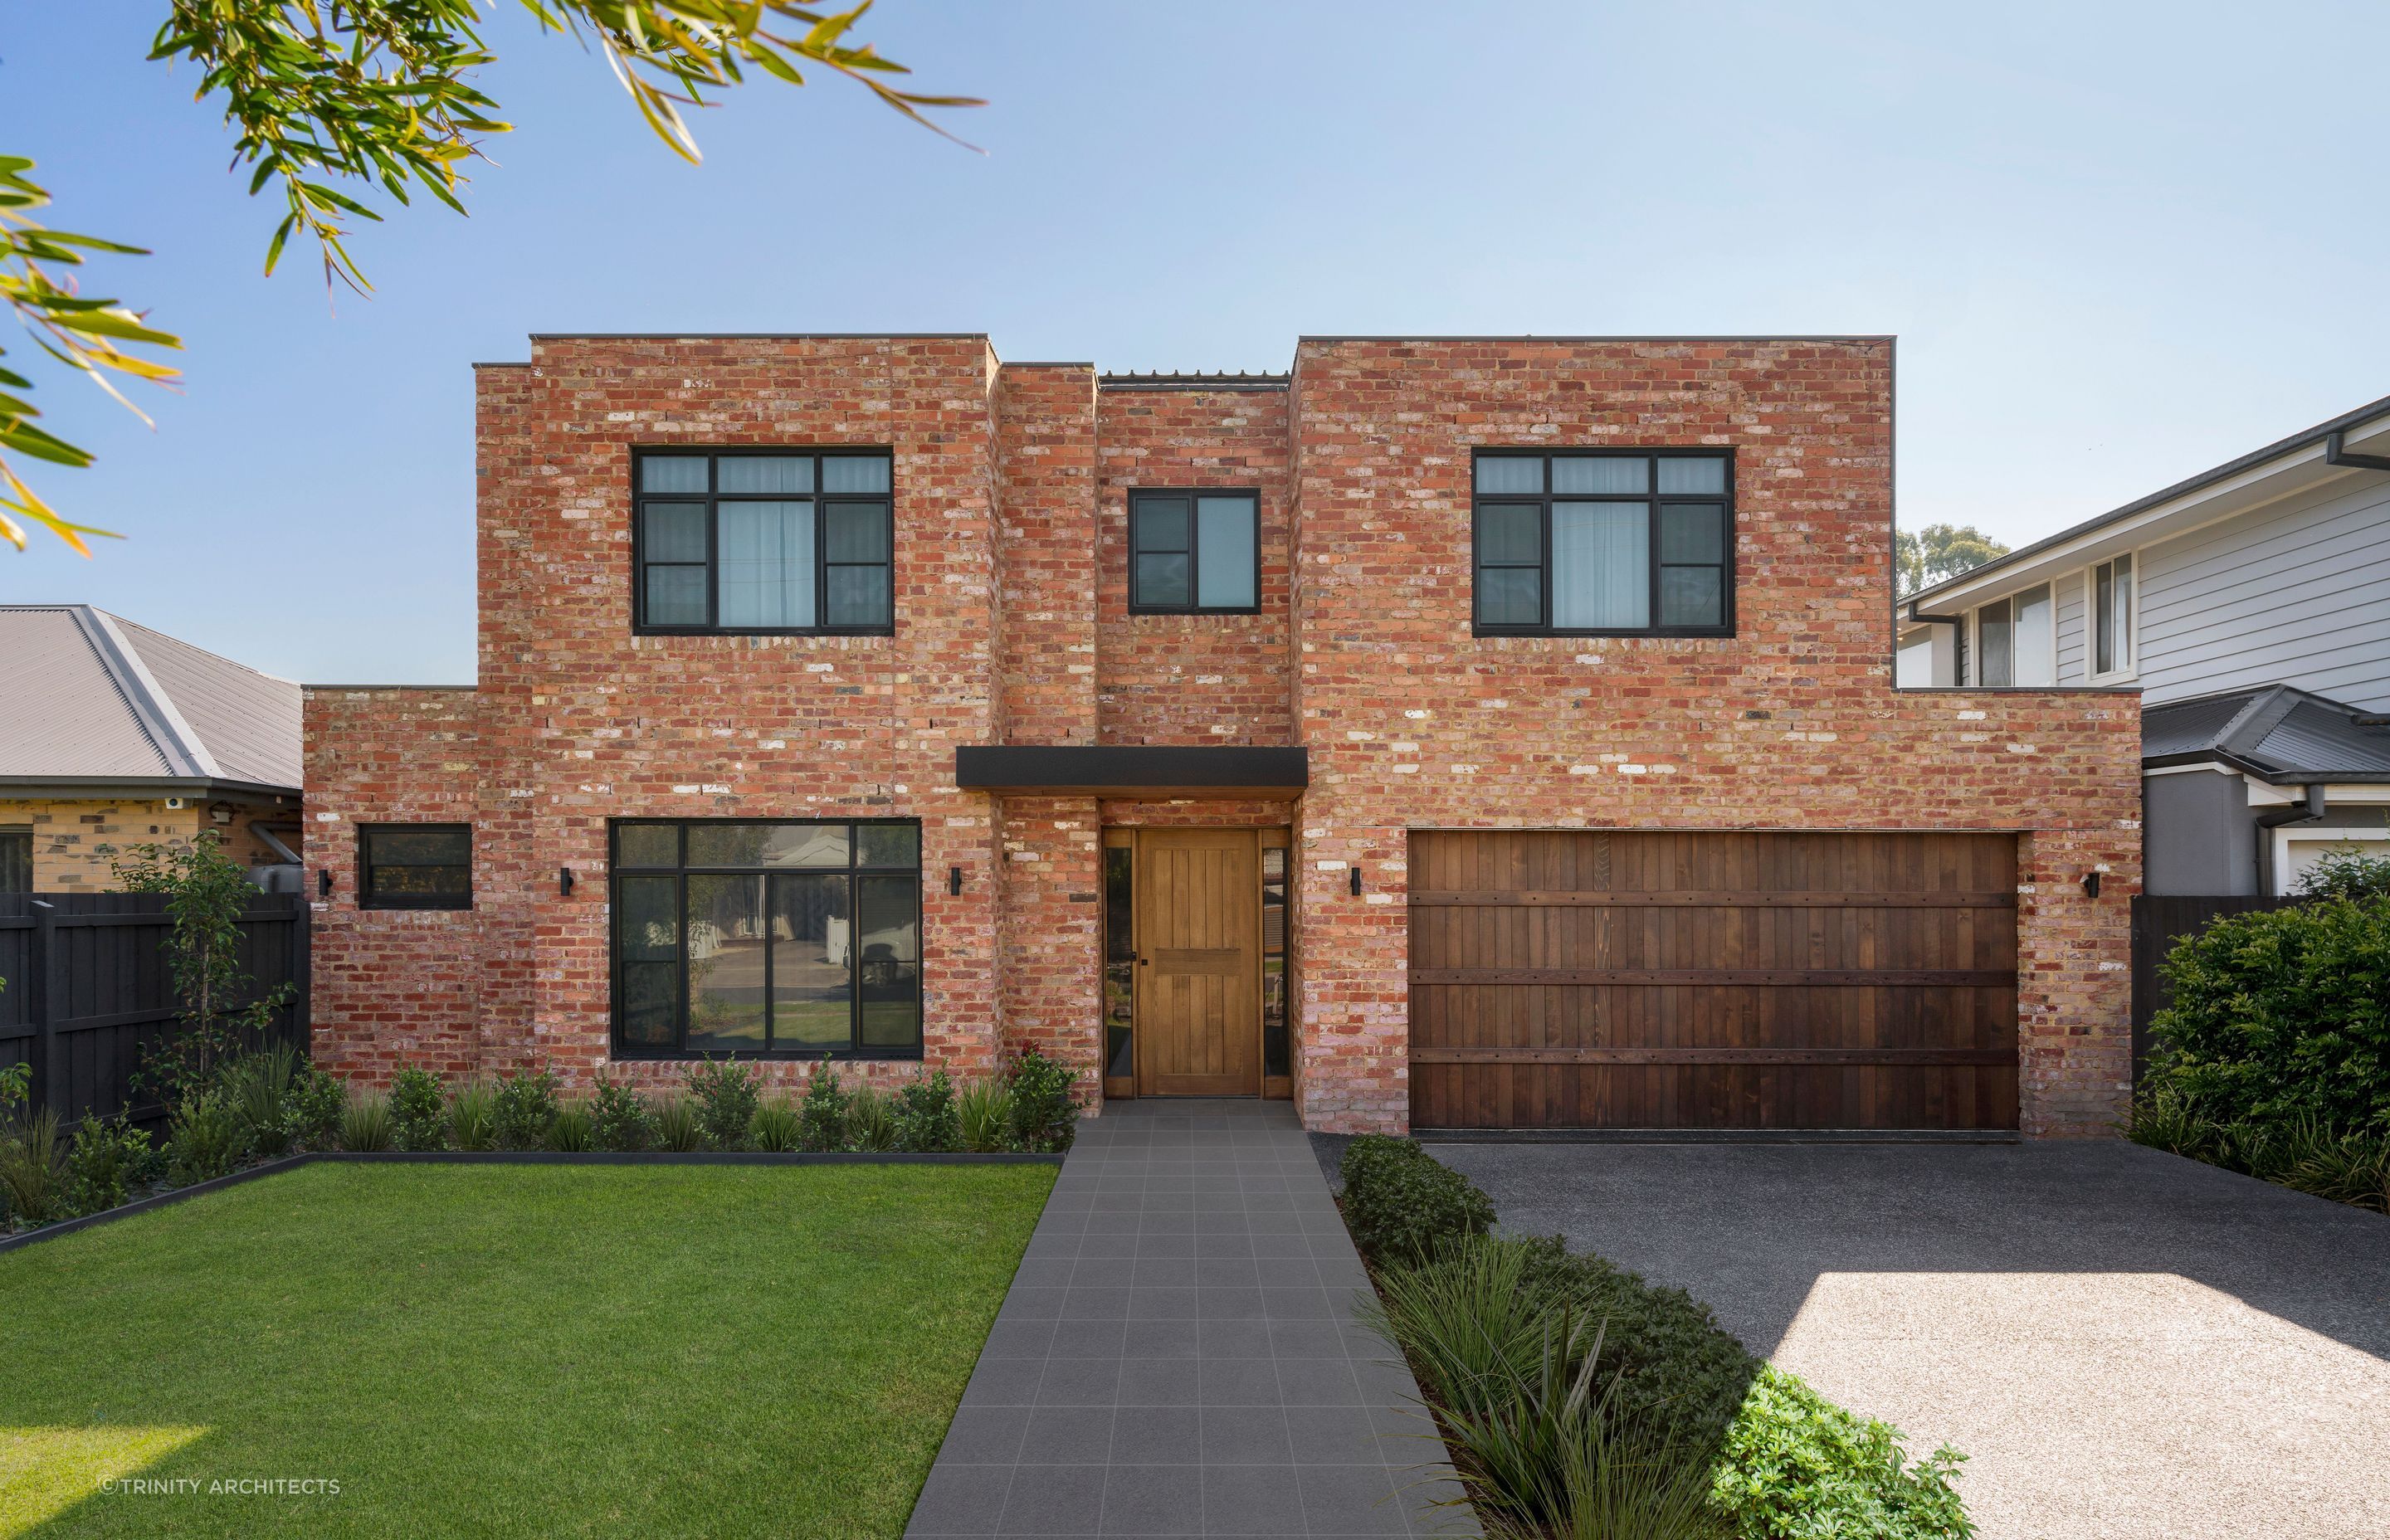 Clay bricks are a popular exterior finish. Featured project: Project One by Trinity Architects